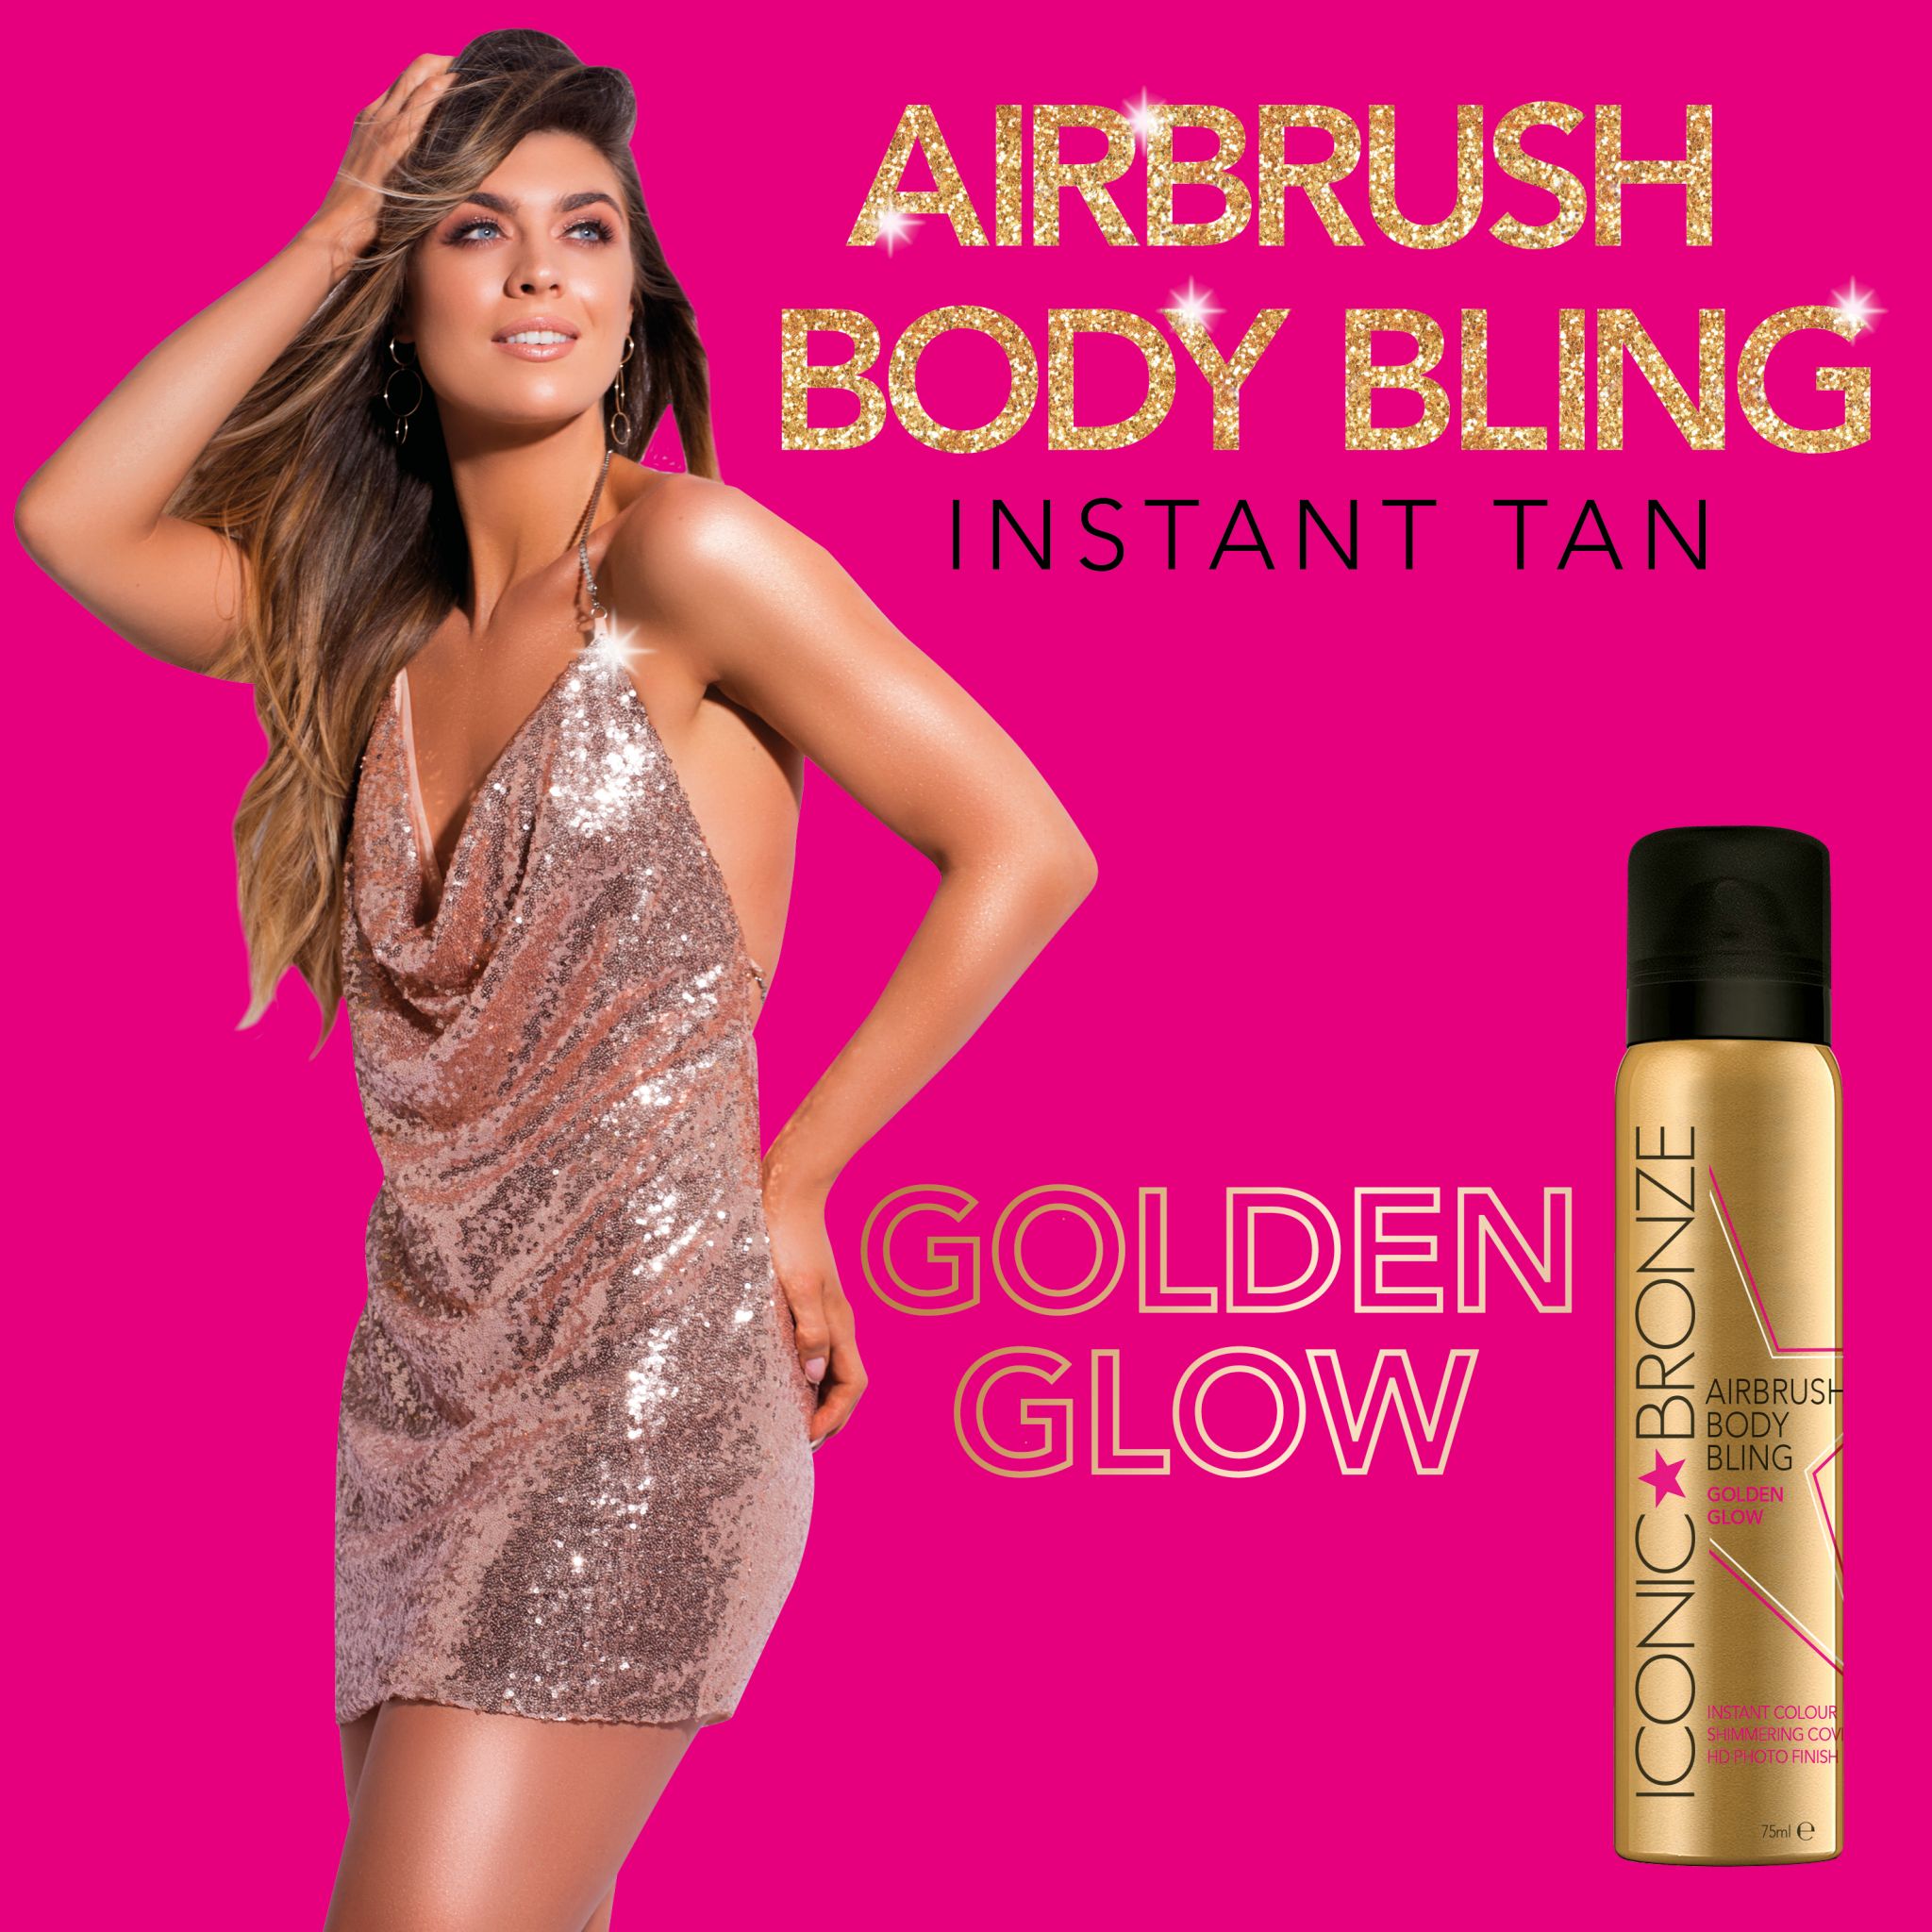 The Only Tan Accessory You Need This Christmas - Iconic Bronze Airbrush Body Bling